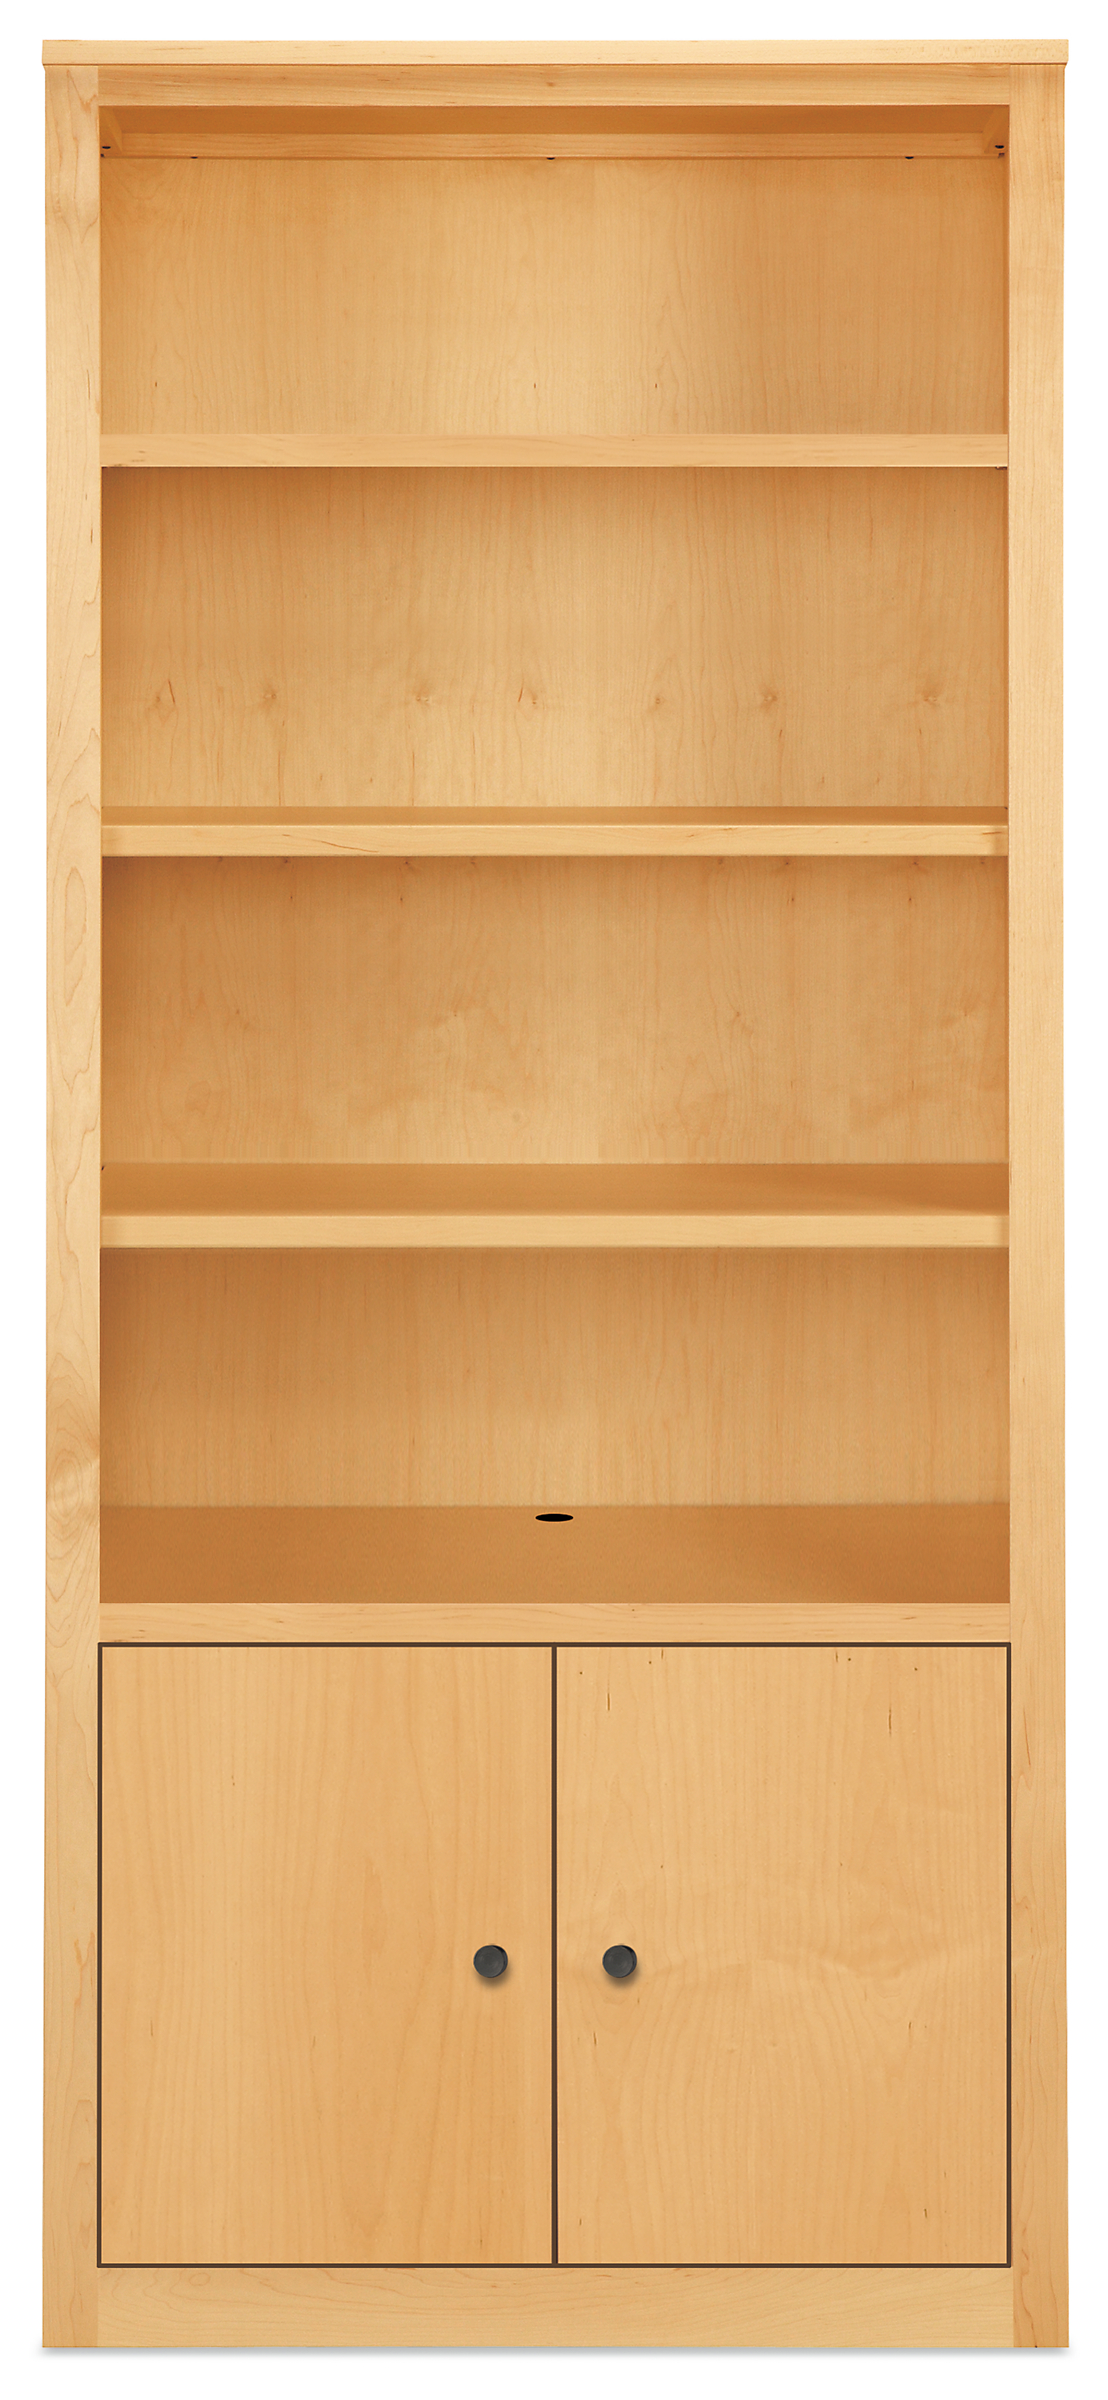 Woodwind 32w 17d 72h Two-Door Bookcase